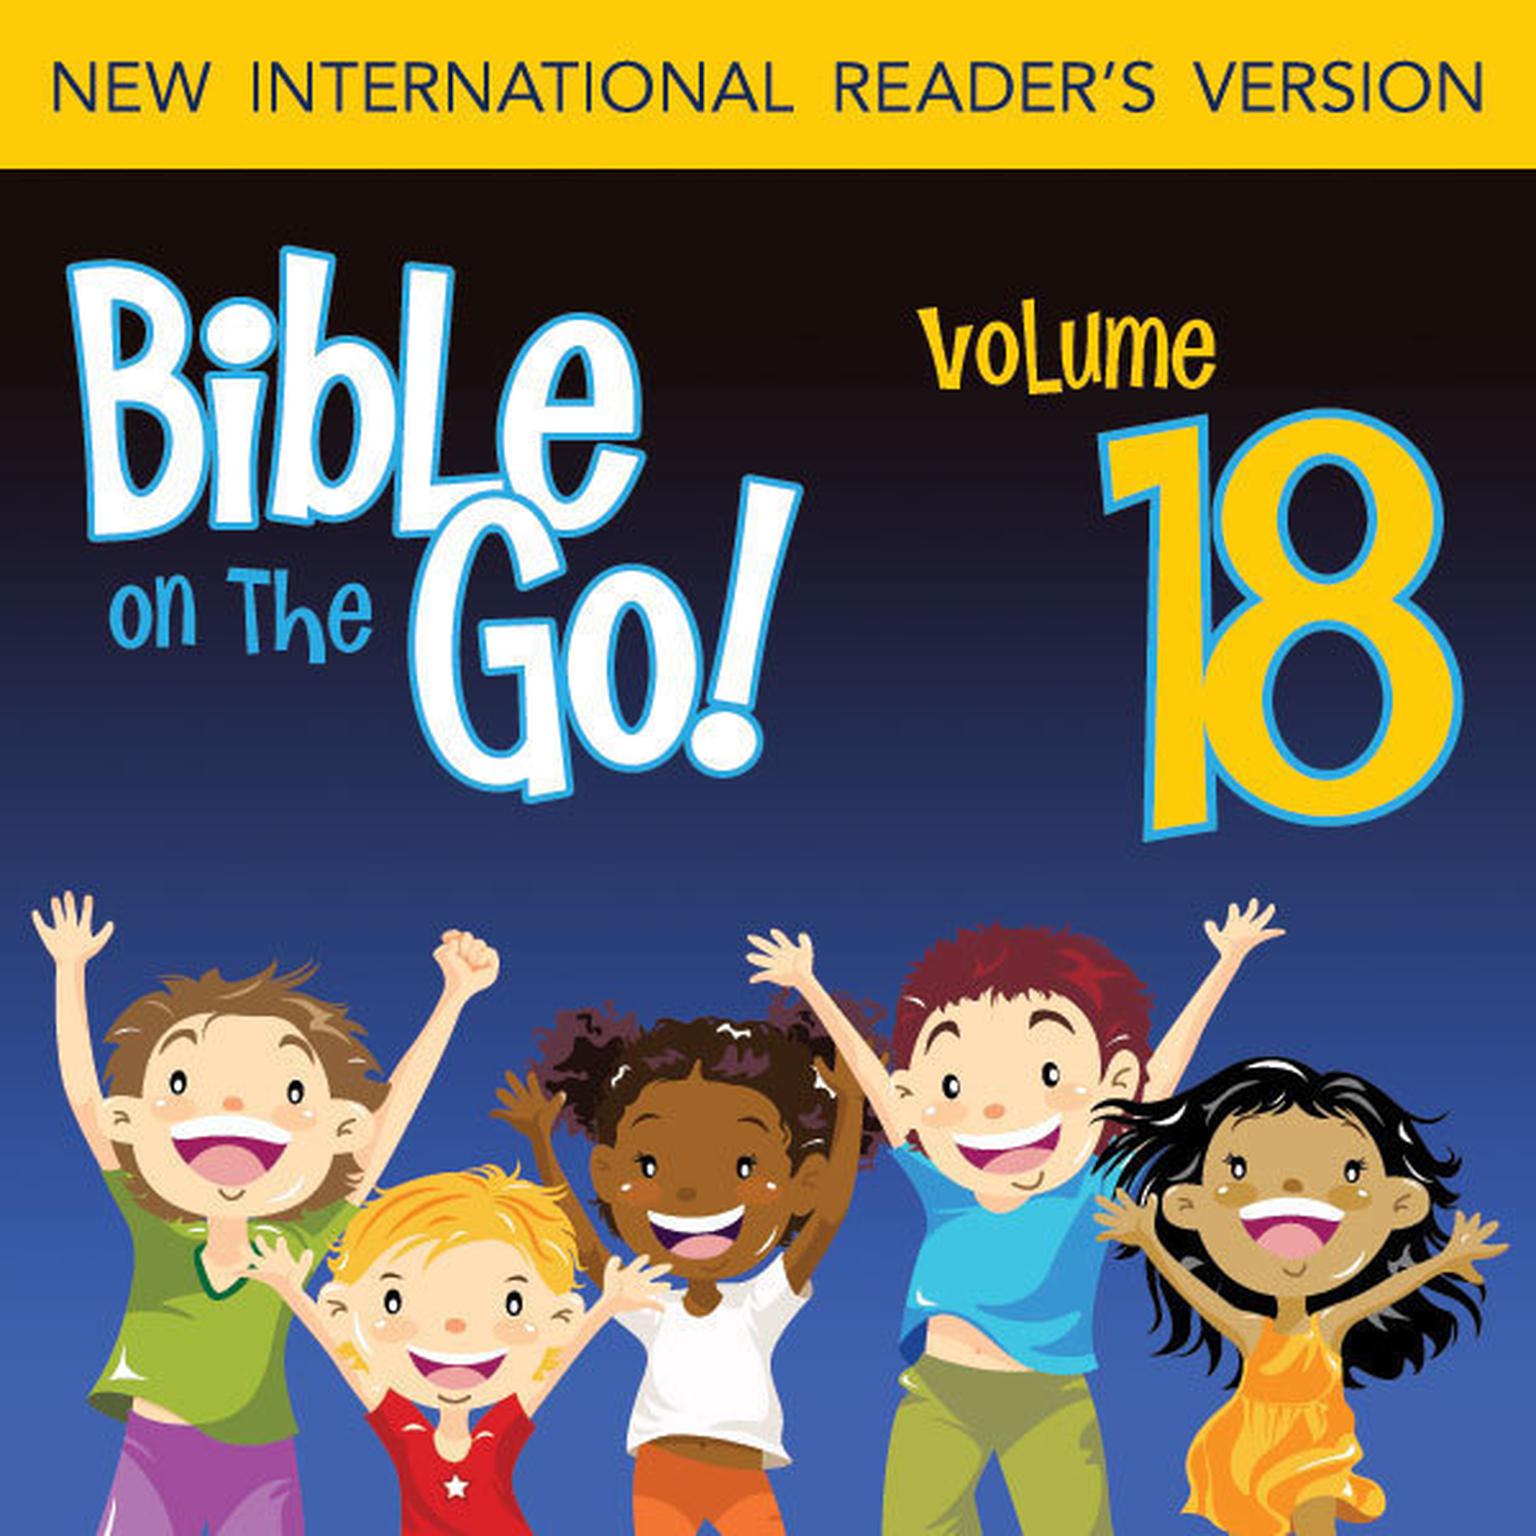 Bible on the Go Audio Bible - New International Readers Version, NIrV: Vol. 18 The Story of King Solomon (1 Kings 2-4, 6-8) Audiobook, by Zondervan